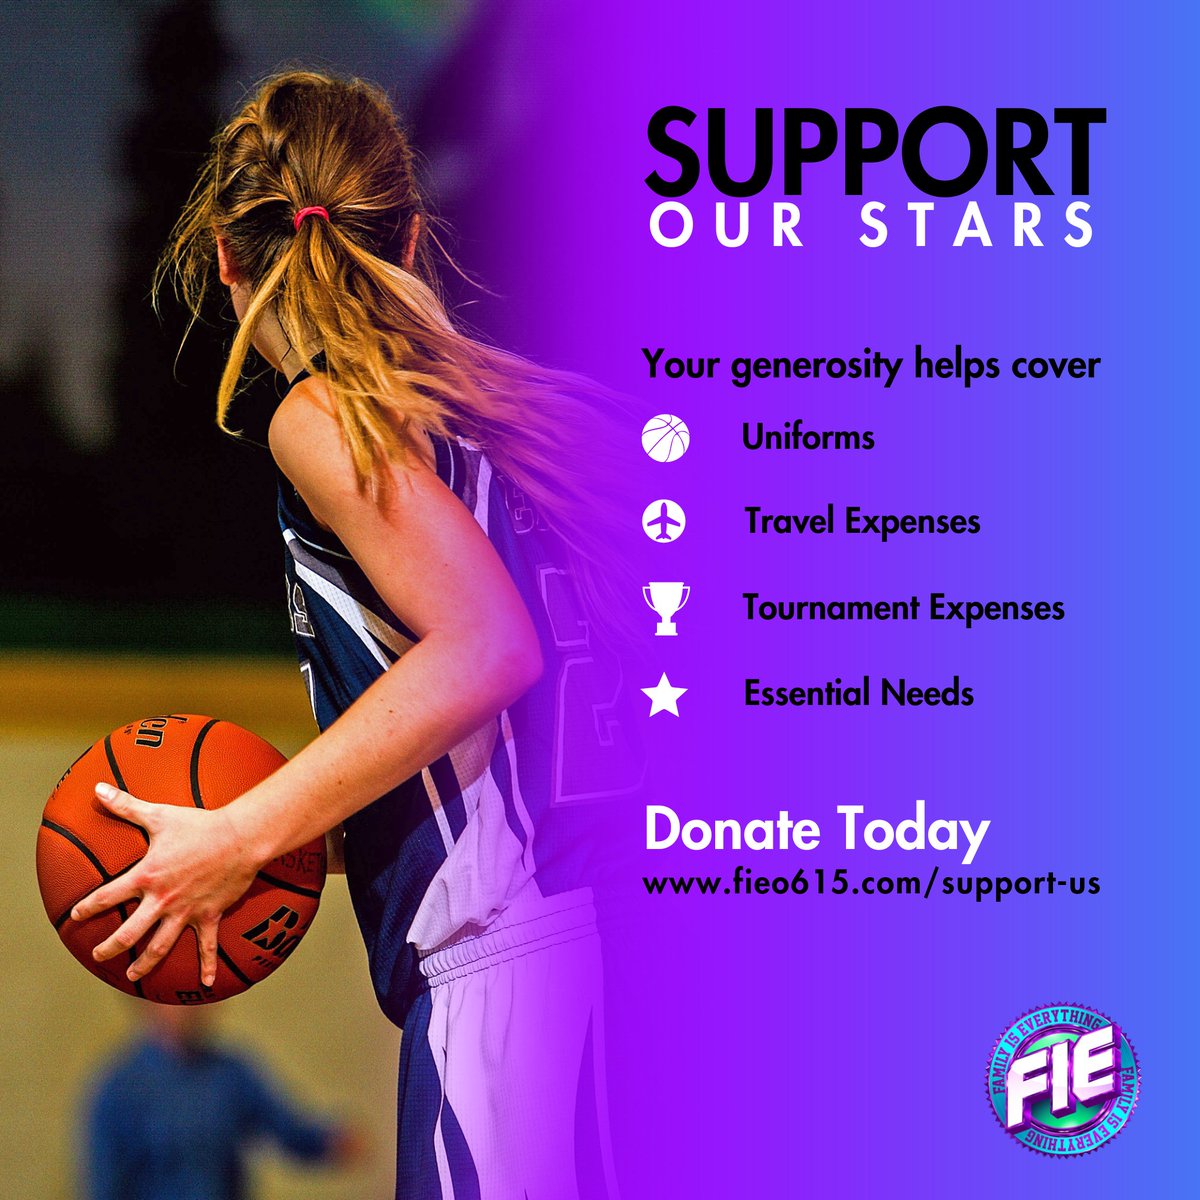 Help our athletes shine on and off the court! Support their journey by covering uniforms, travel, tournaments, and essentials. Every donation makes a difference! Visit fie0615.com/support-us and make a contribution today.